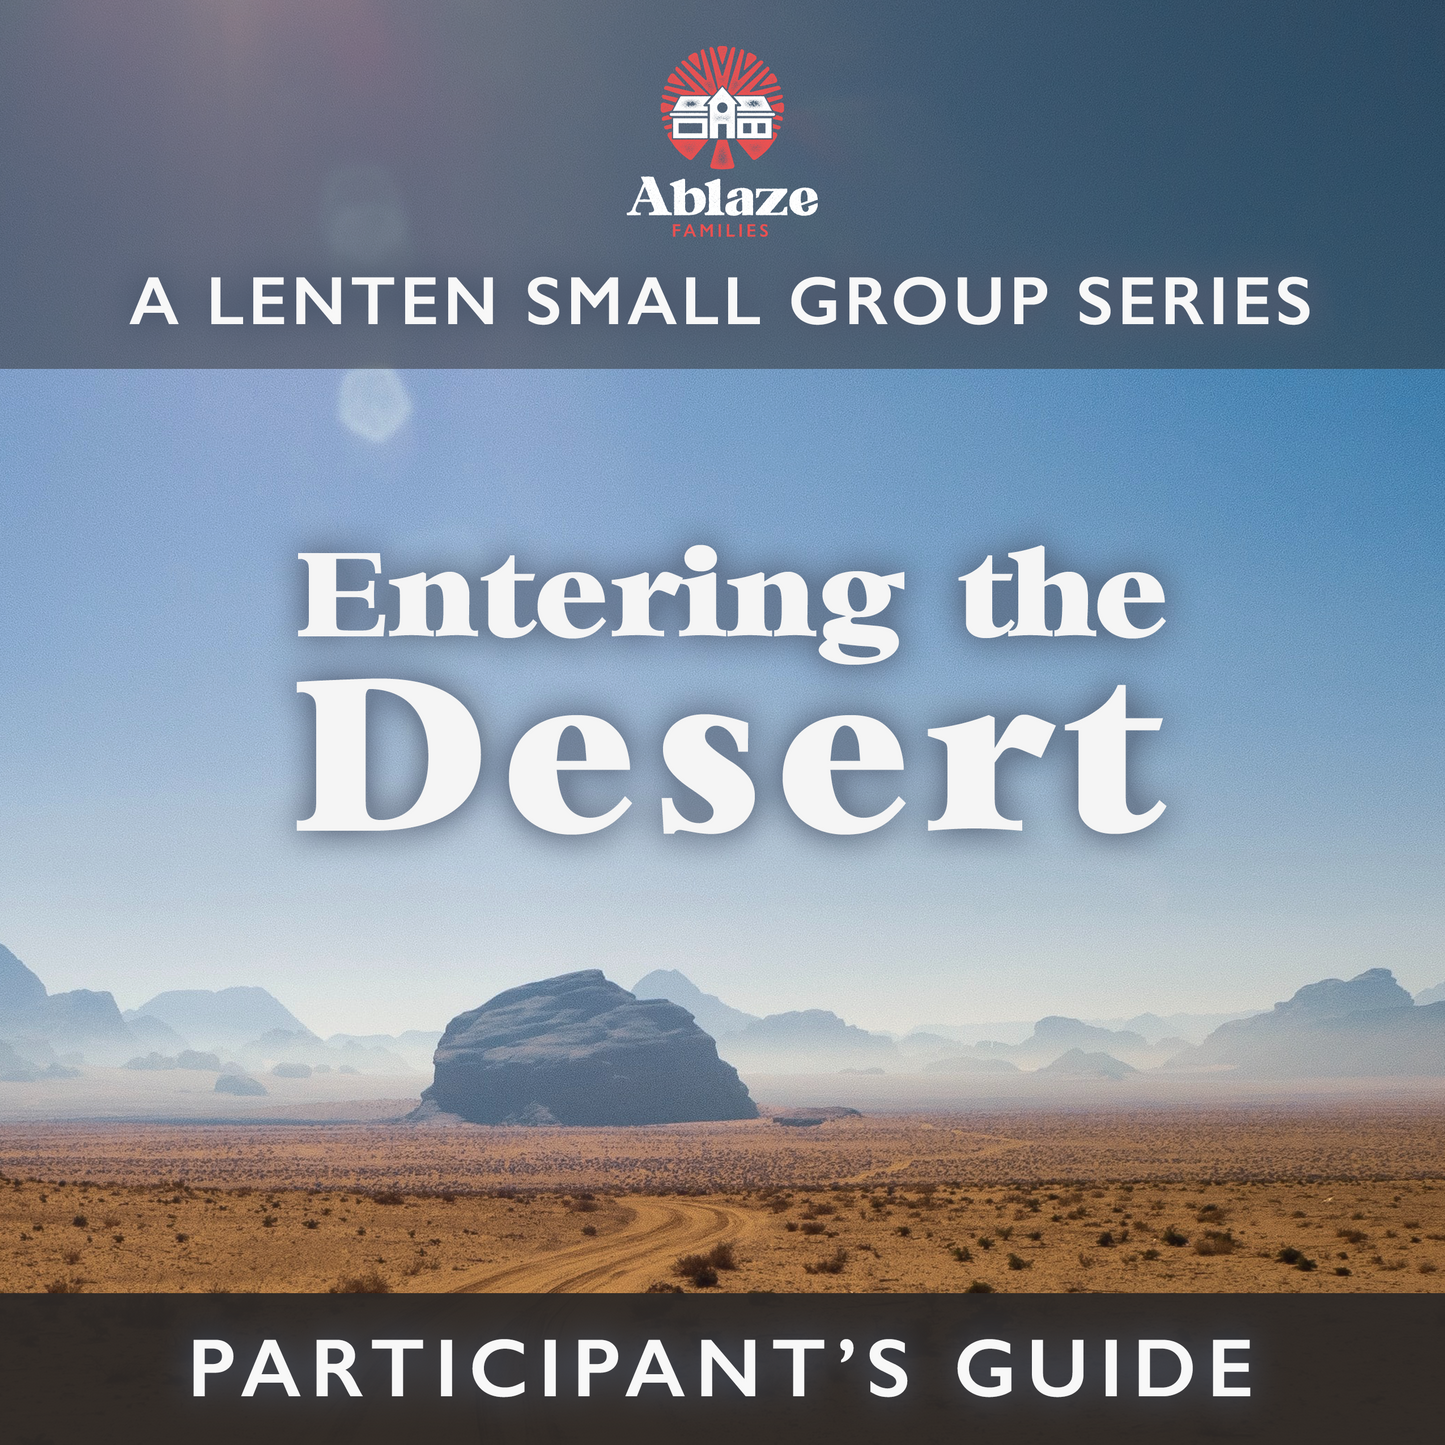 Participant's Guide to "Entering the Desert"